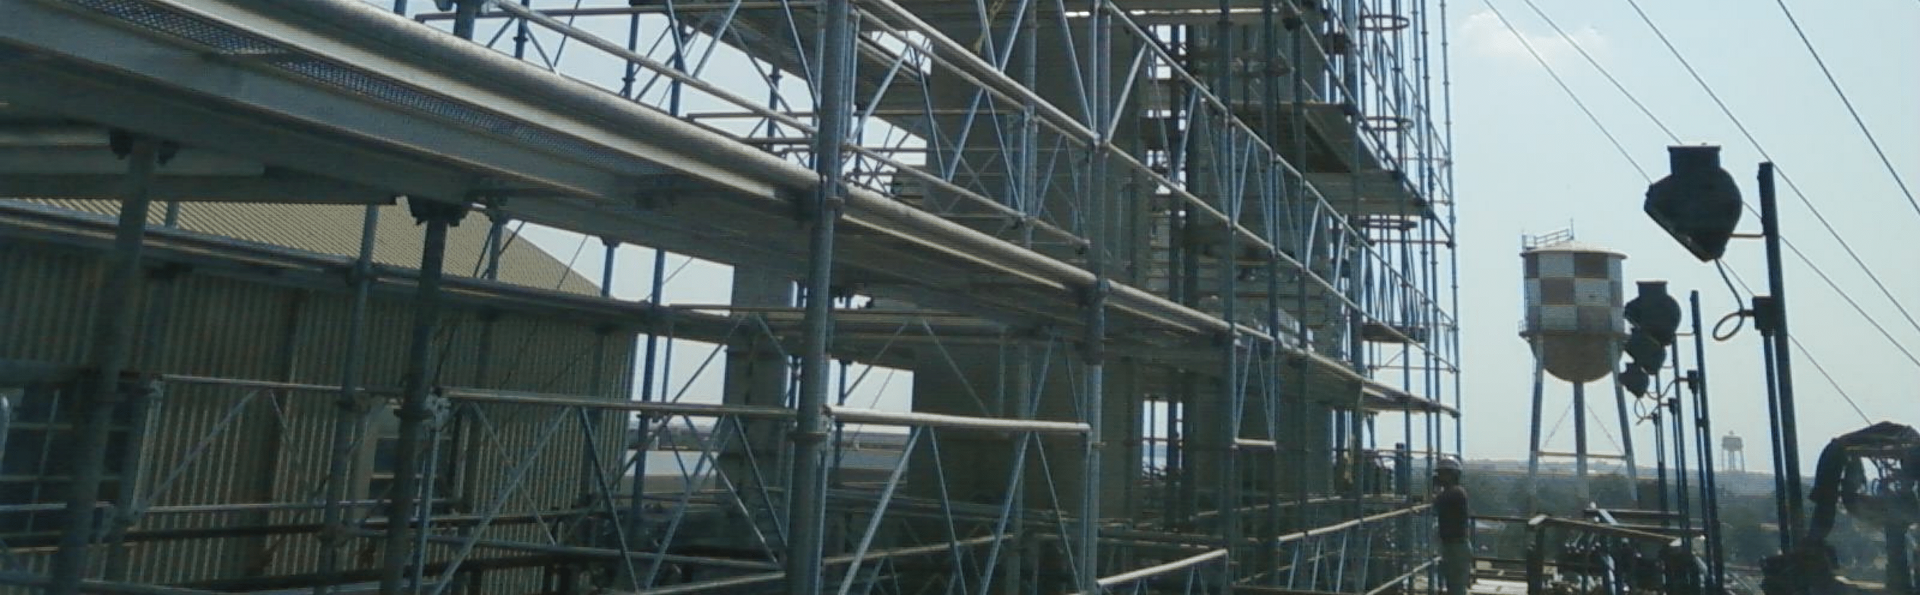 Scaffolding Resources, Articles, and Information